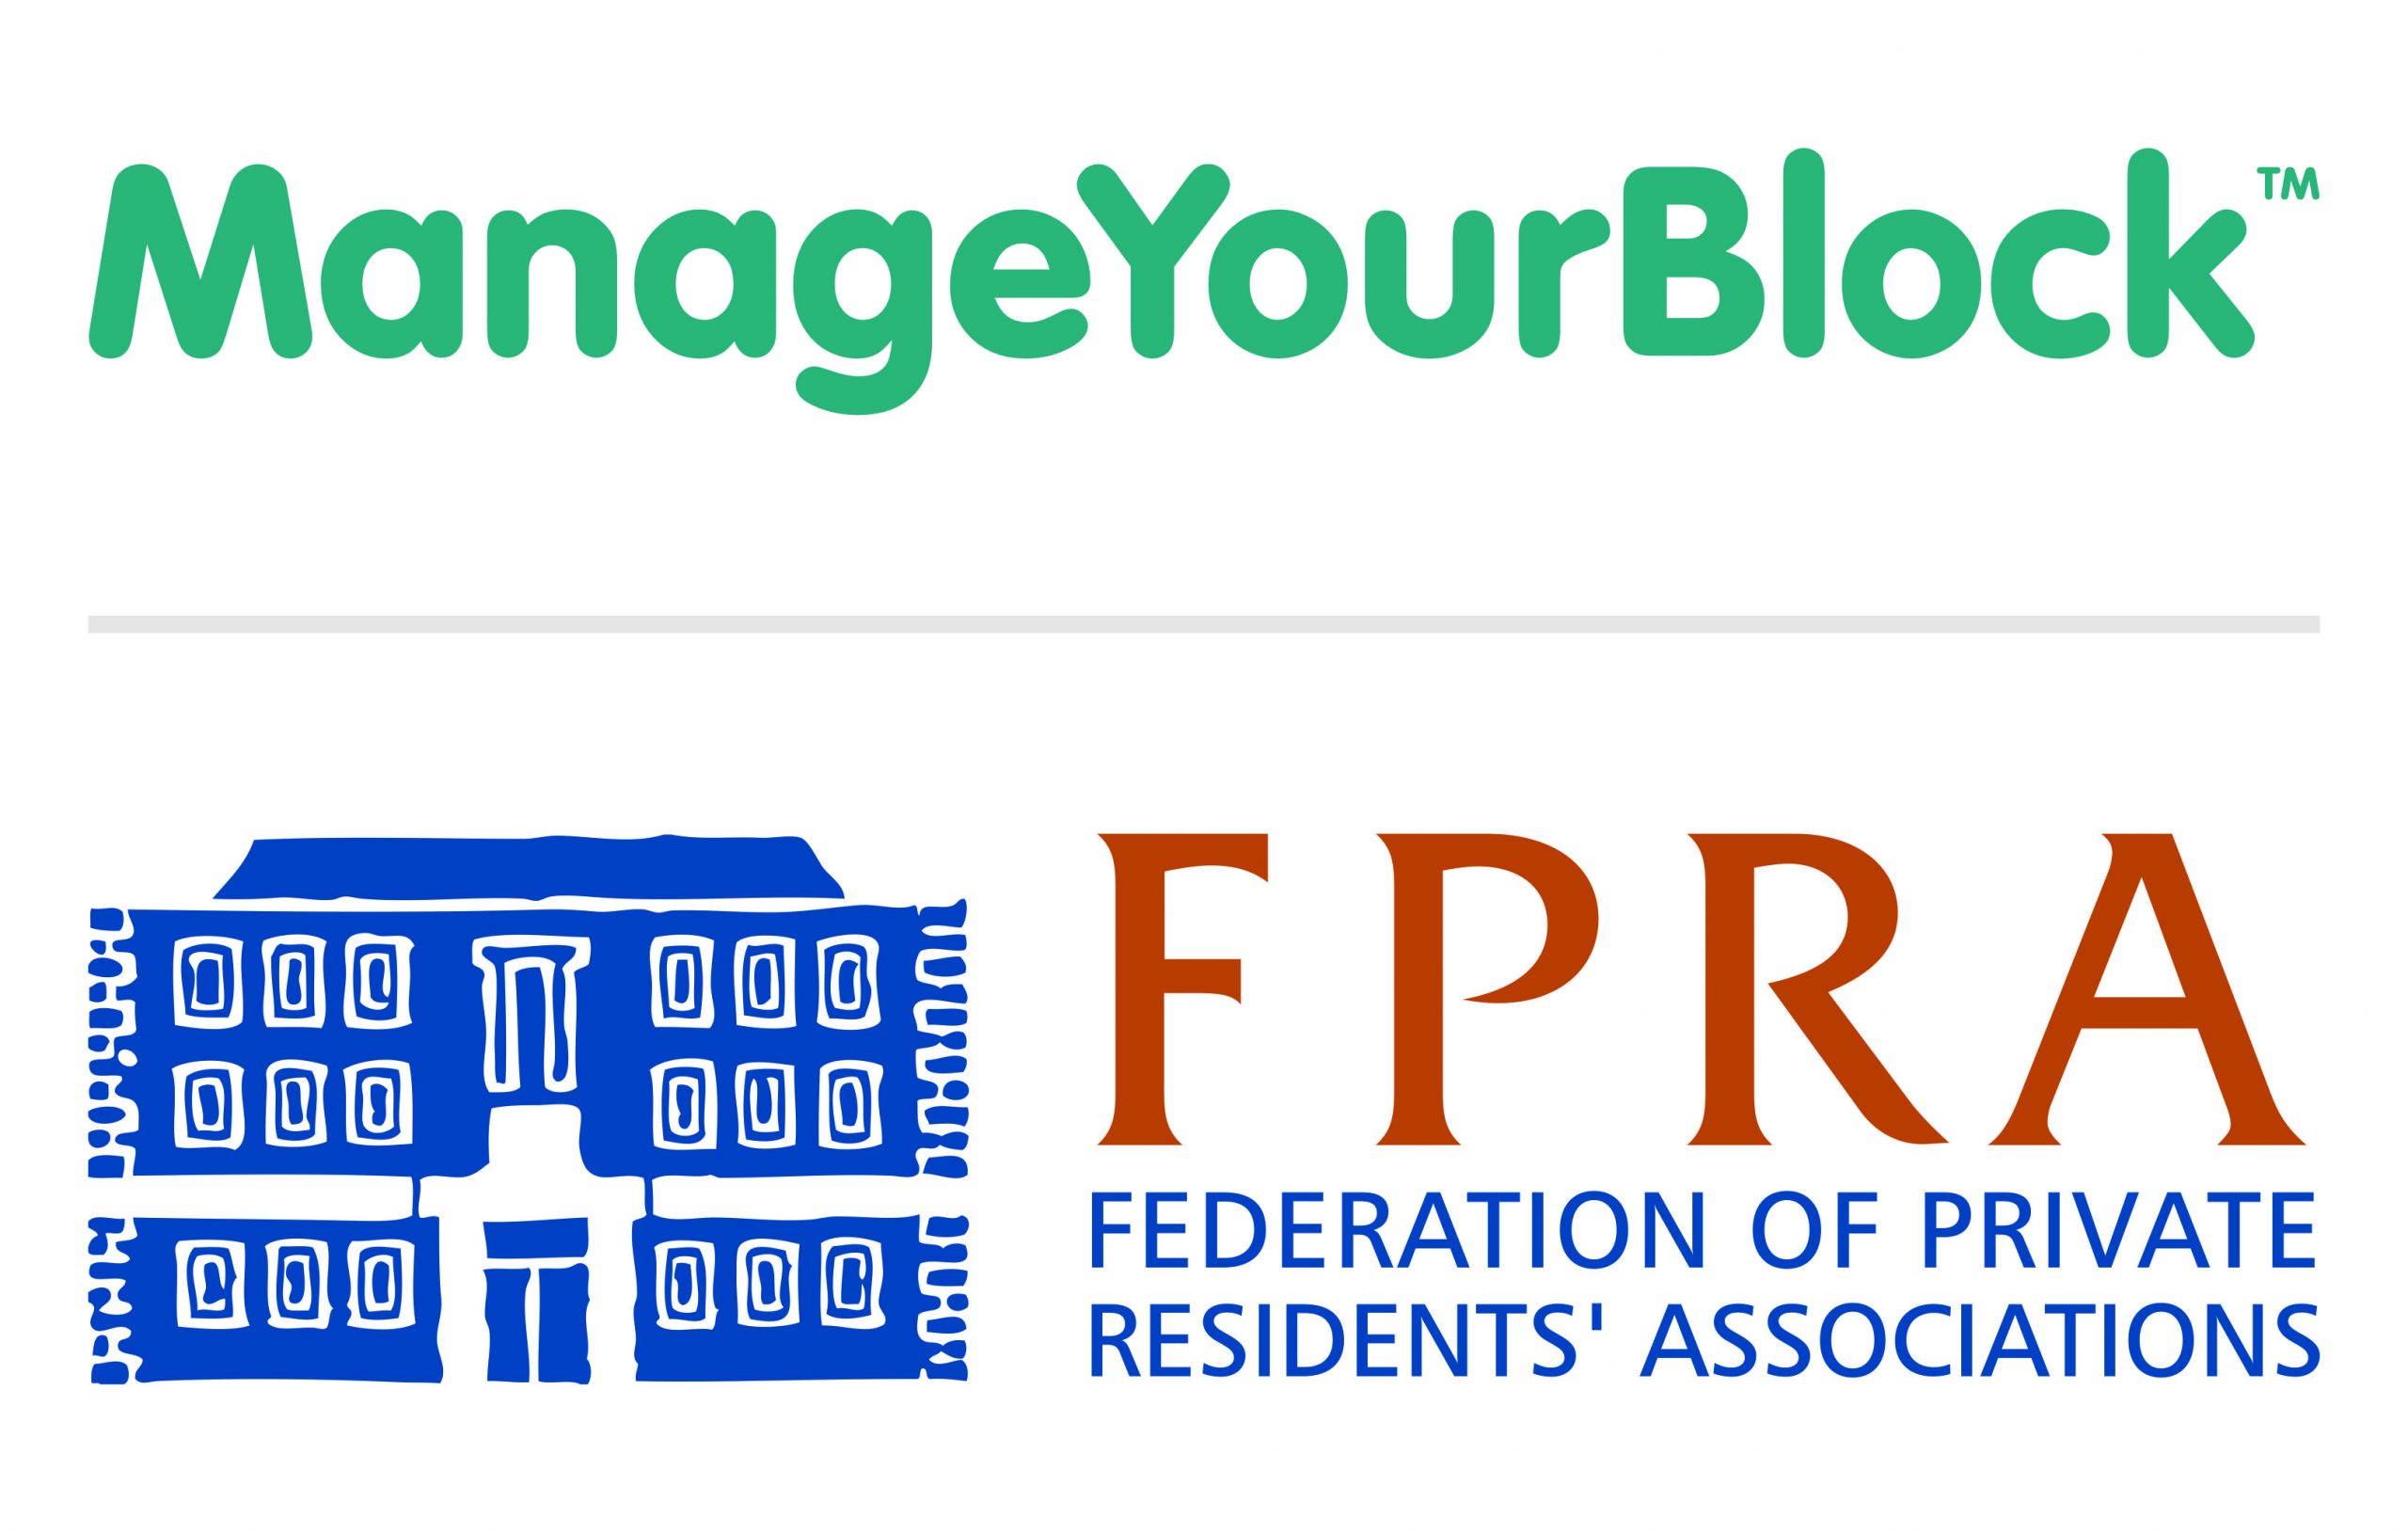 Manage Your Block partners with the FPRA